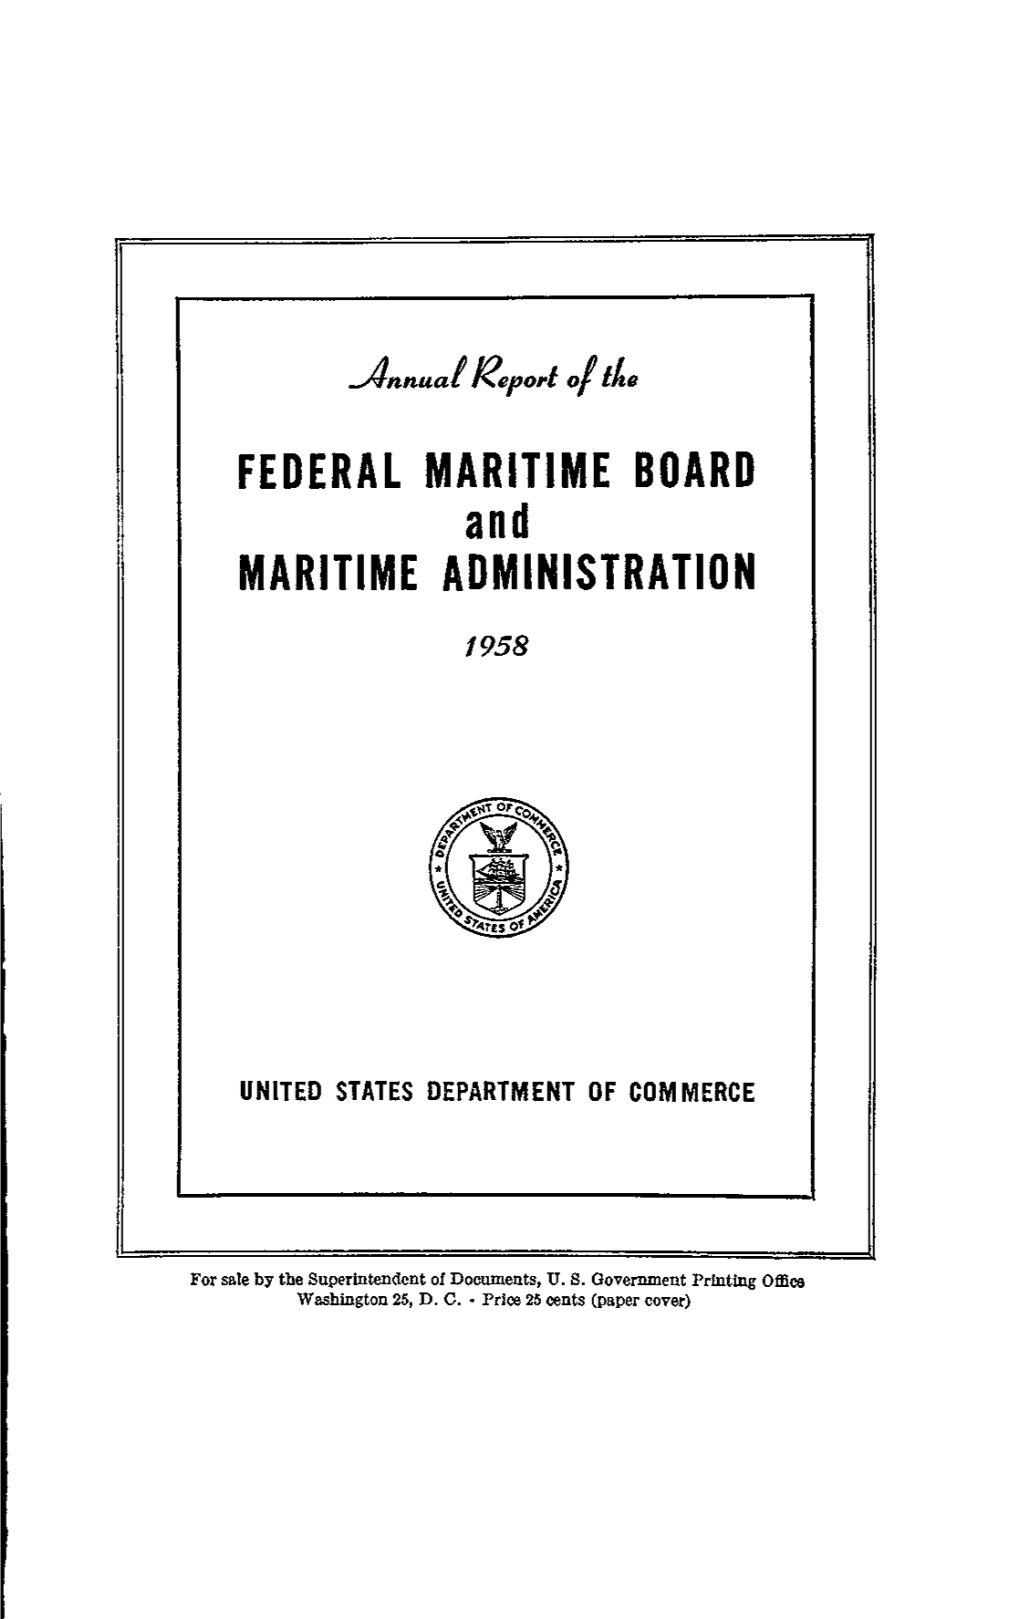 Annual Report for Fiscal Year 1958